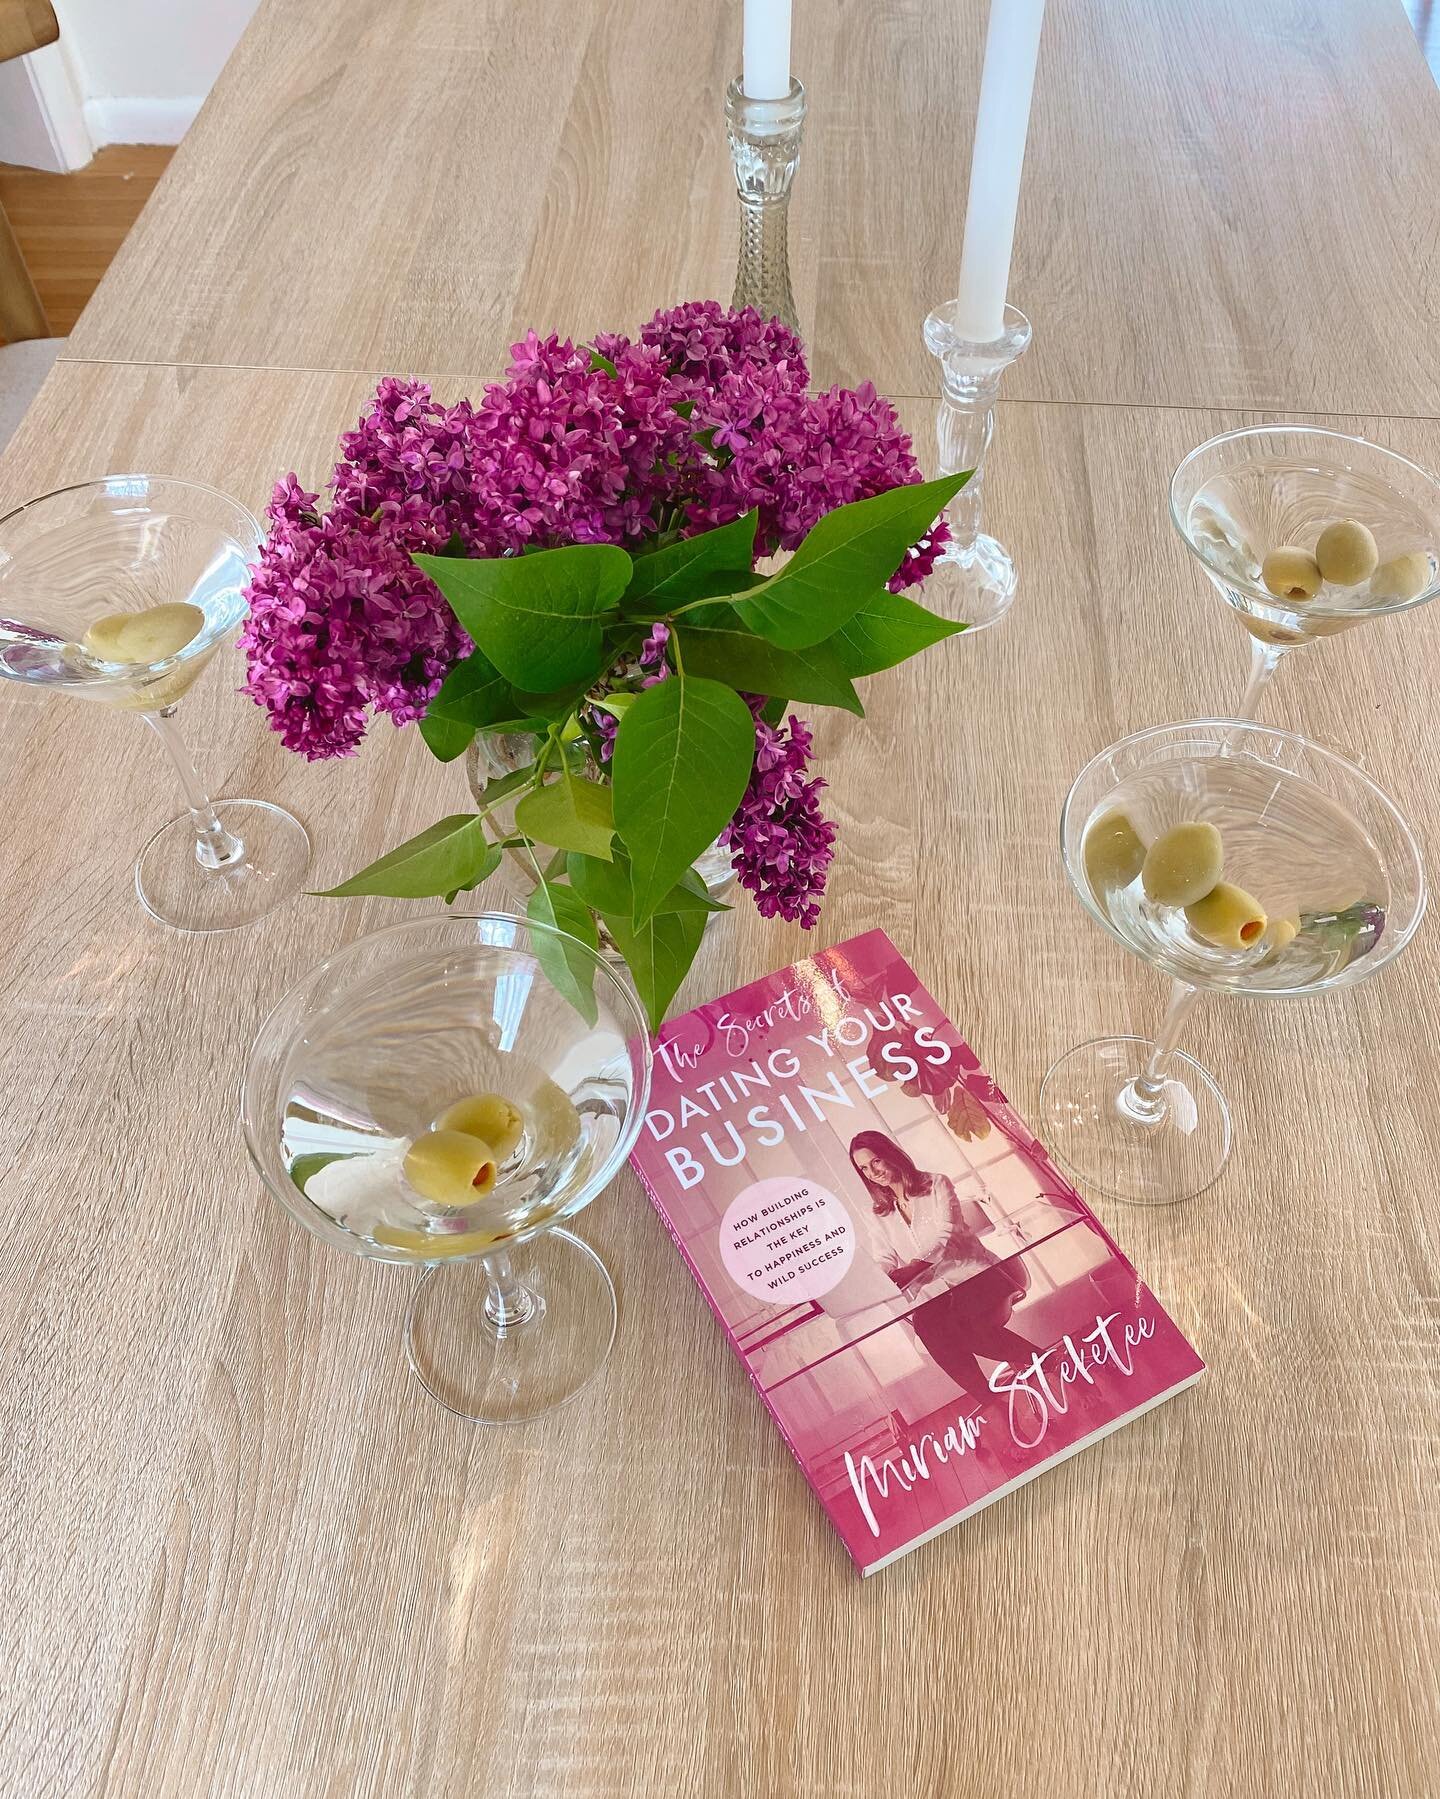 Heading into the long weekend like 😍🍸 This is my kind of book club!! Drinks, friends, and conversations about my new book 💞